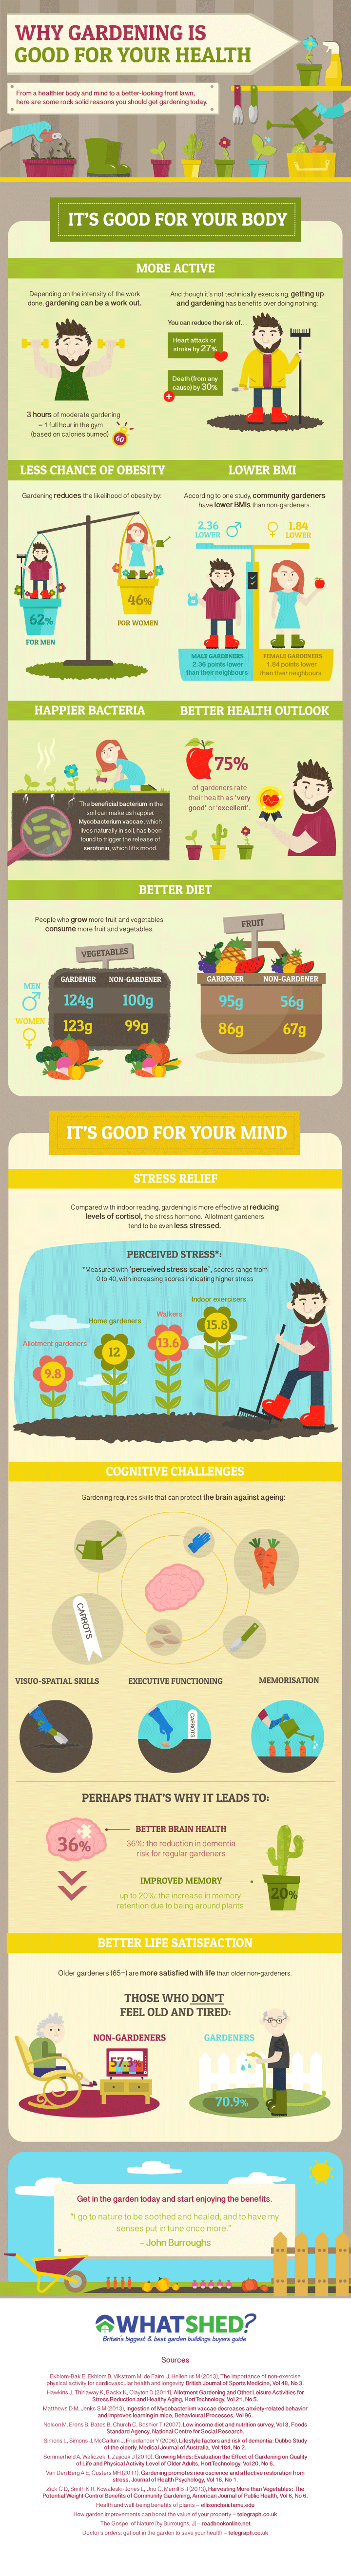  Why Gardening is Good for You